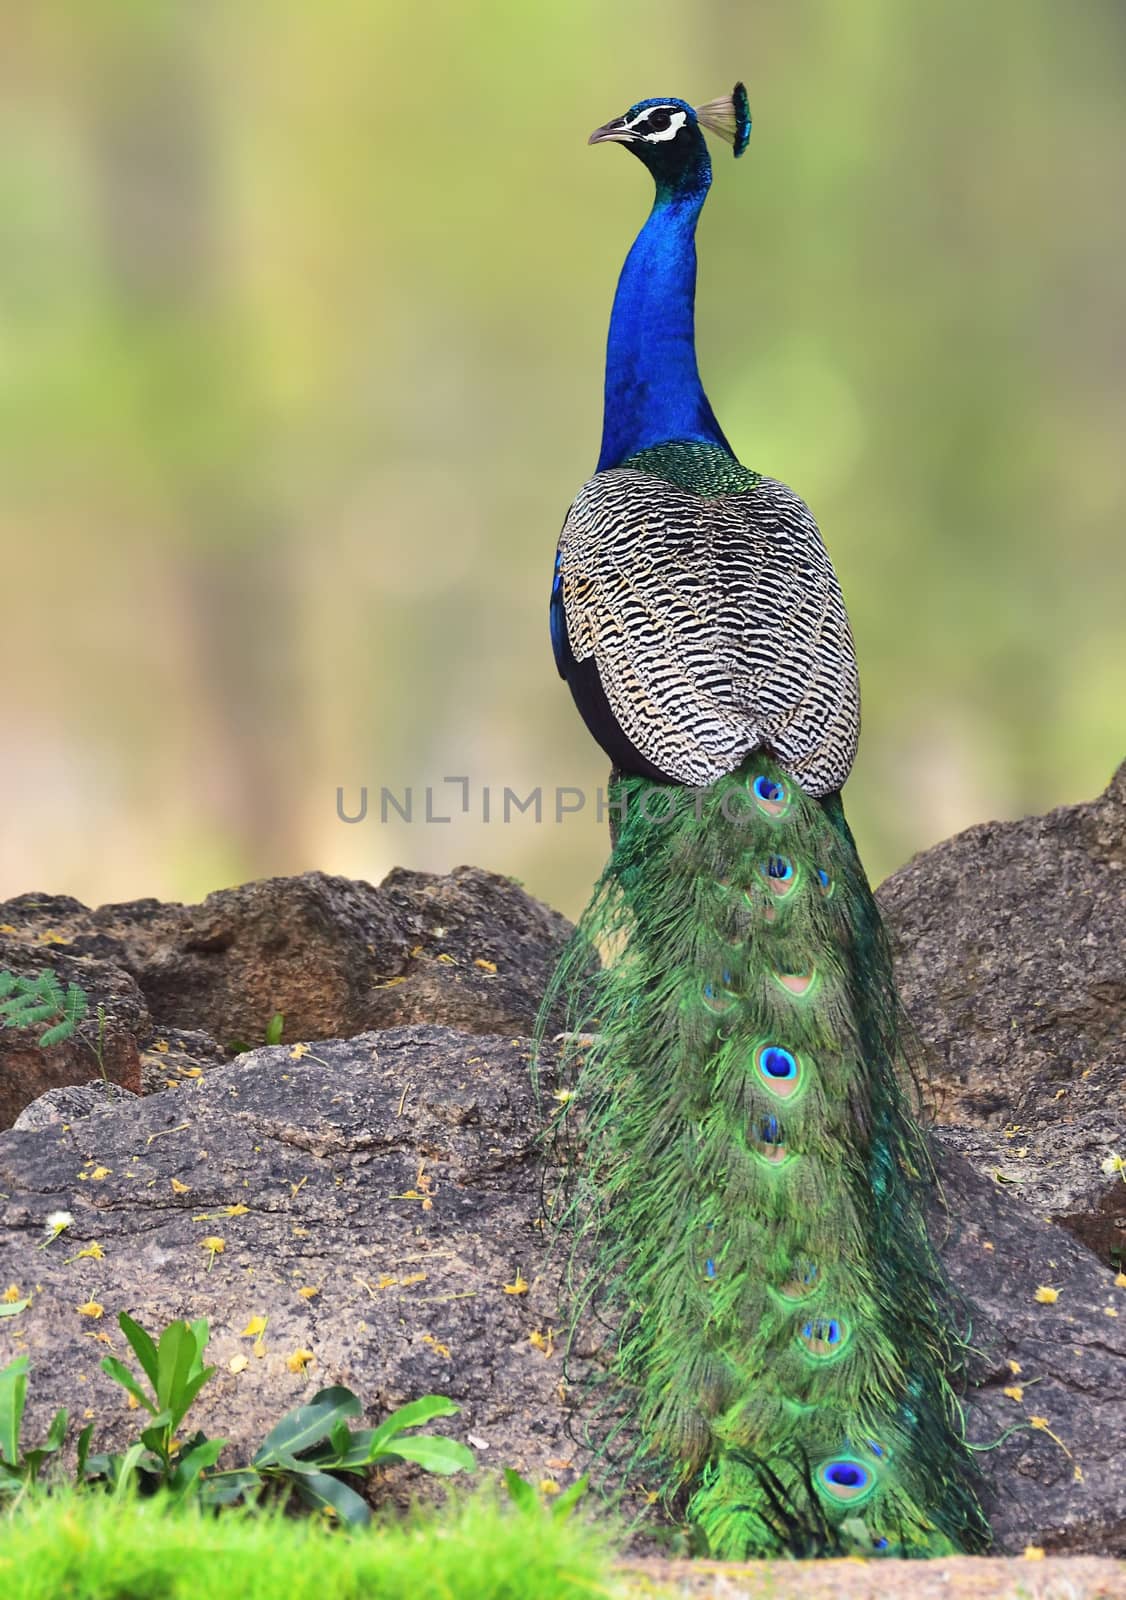 The Indian peafowl, also known as the common peafowl, and blue peafowl, is a peafowl species native to the Indian subcontinent. It has been introduced to many other countries.